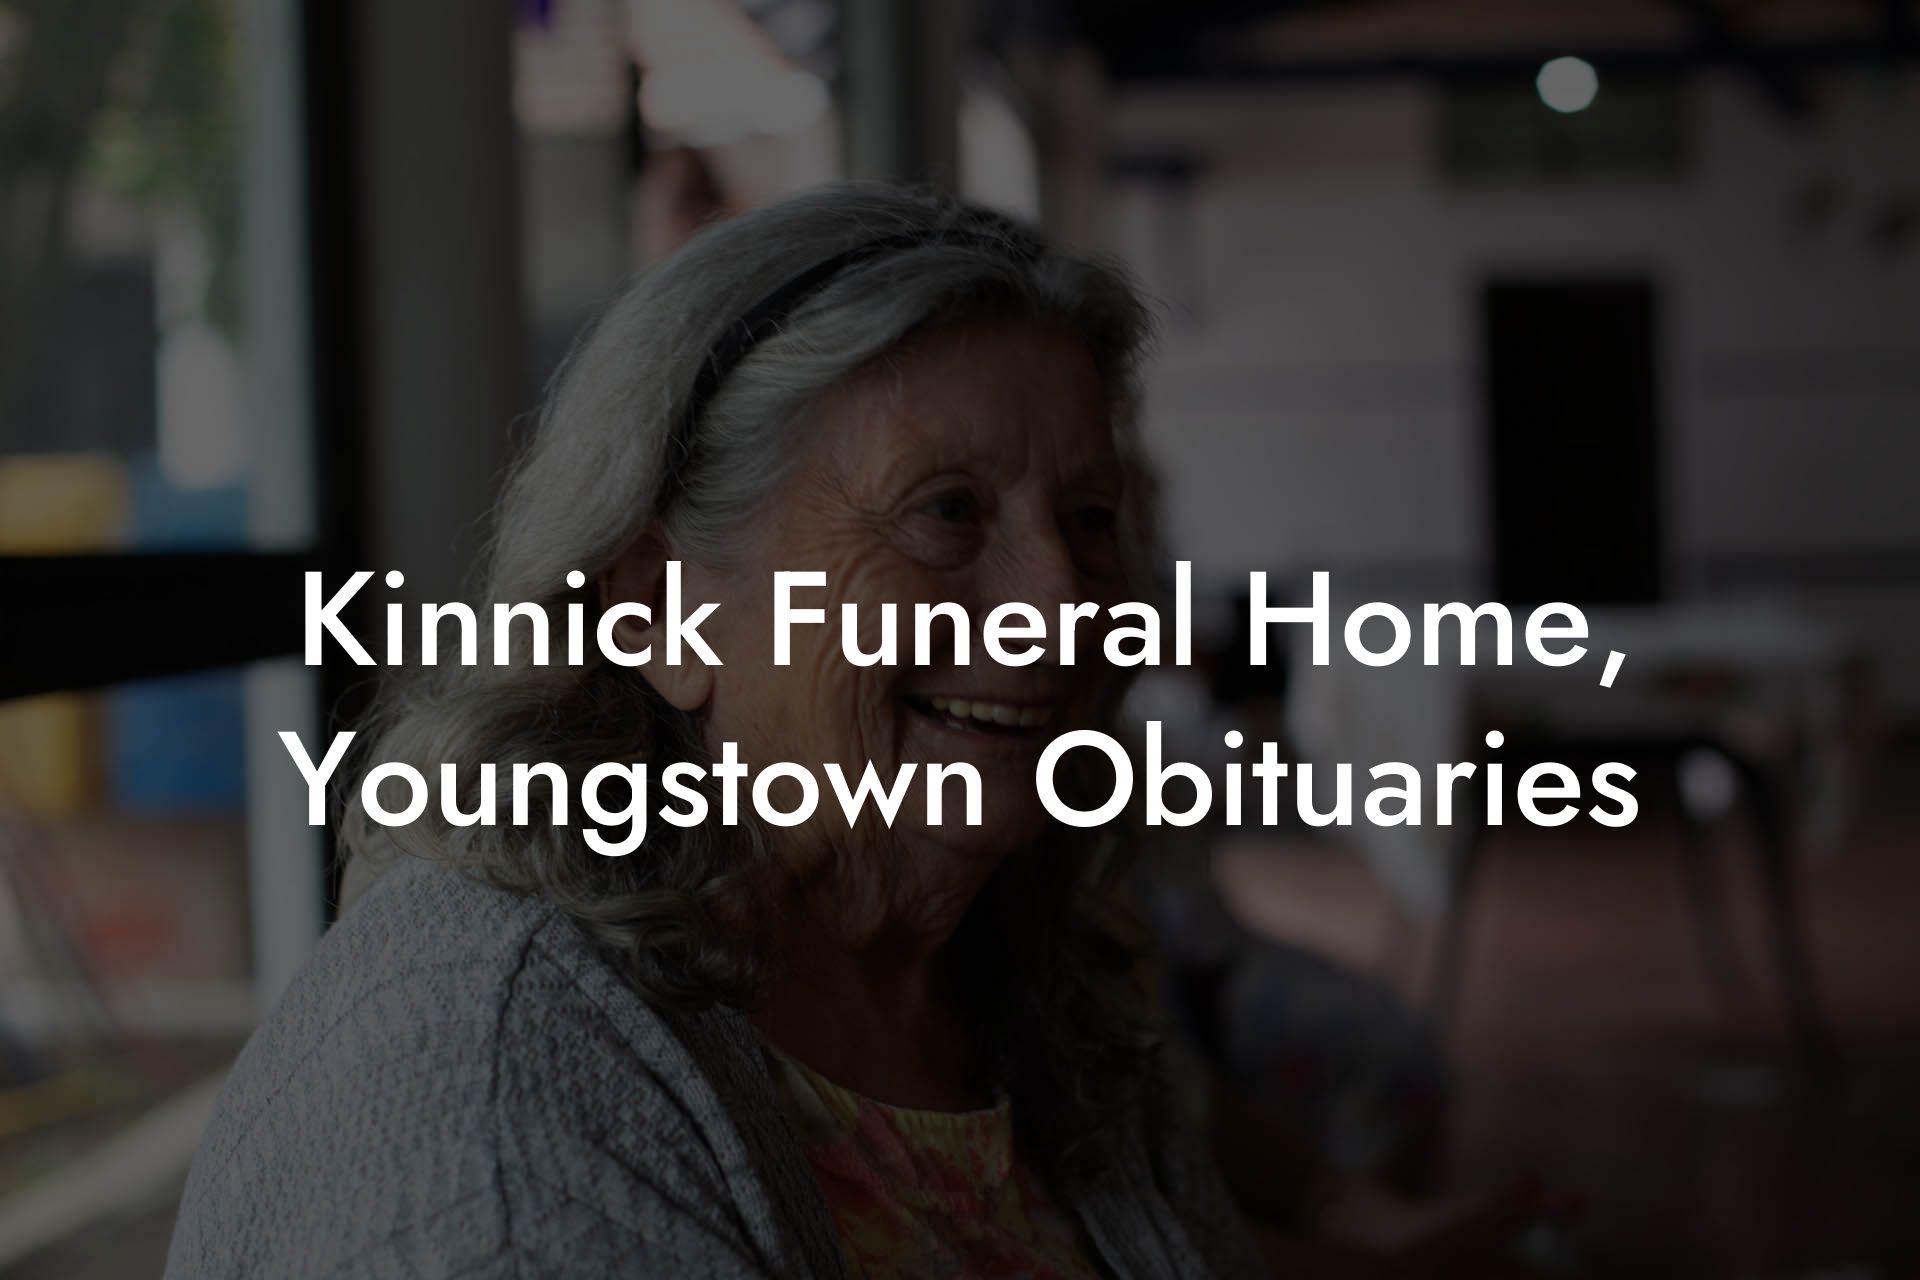 Kinnick Funeral Home, Youngstown Obituaries